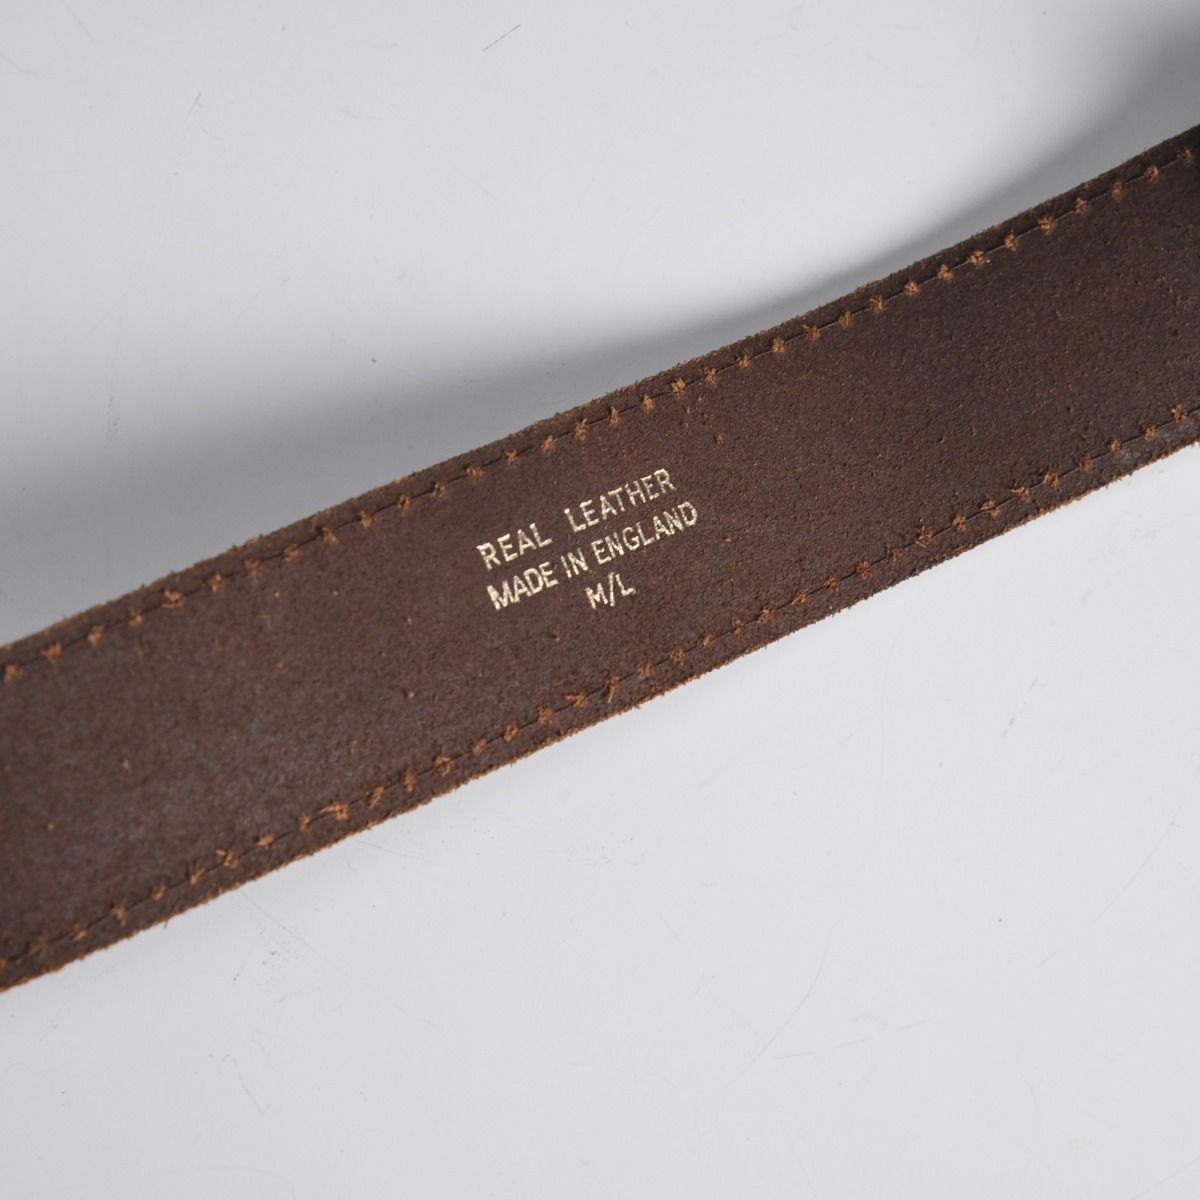 The Trader Jeans Company Belt